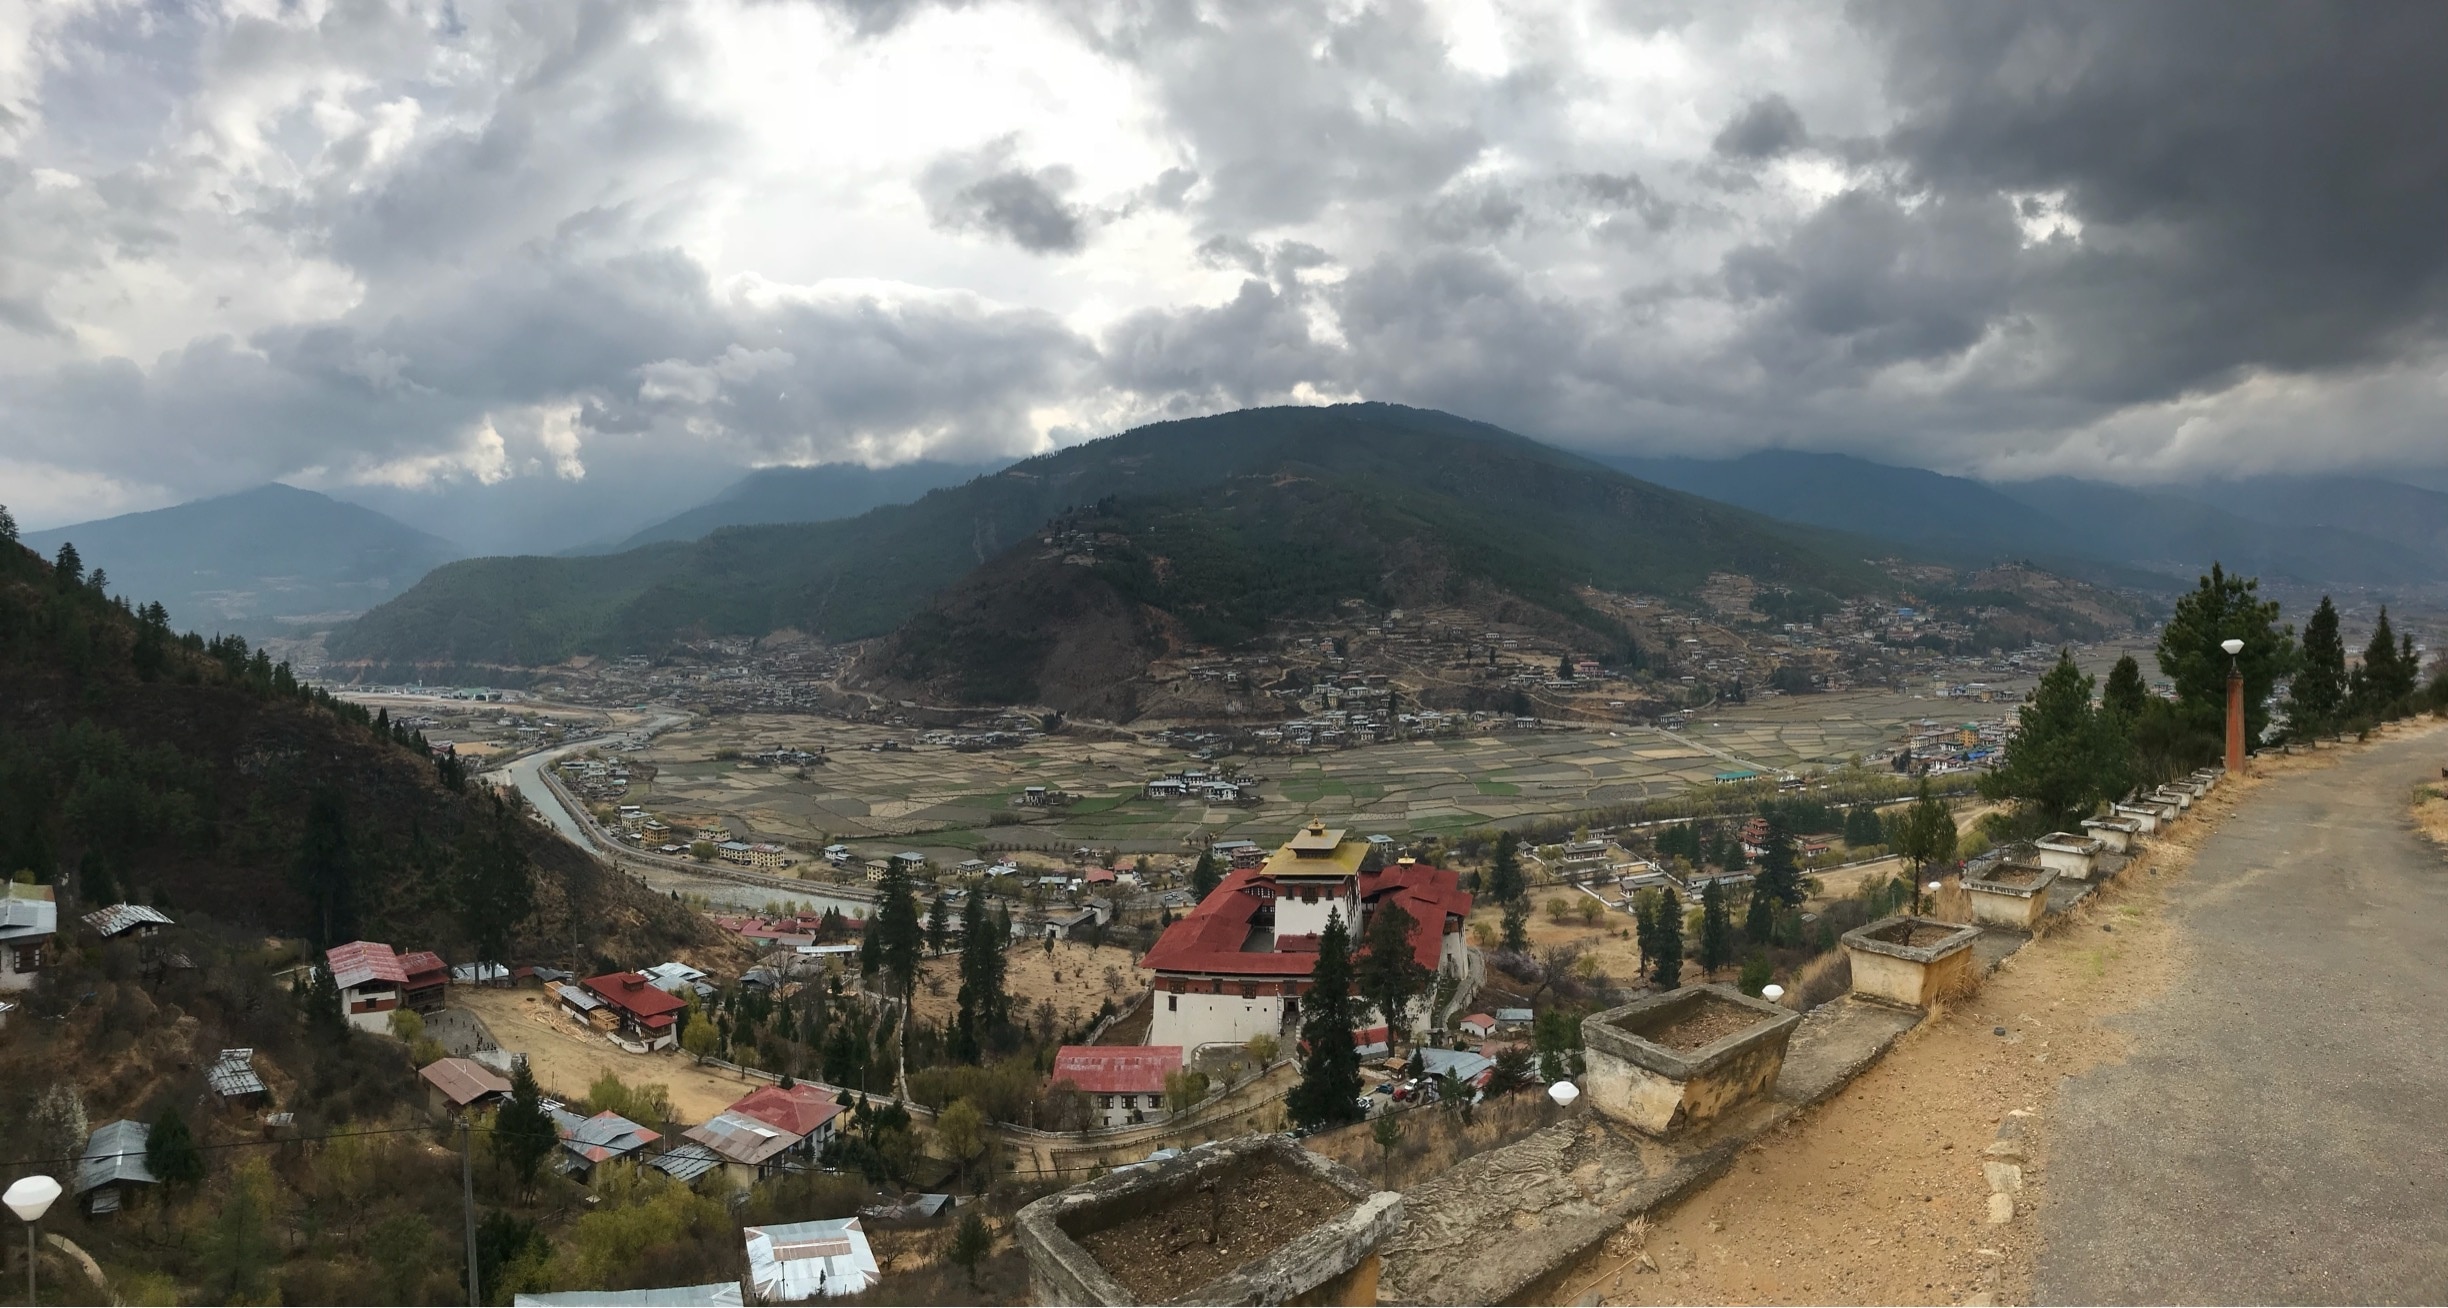 The stunning Himalayan town of Paro, Bhutan.  The National Museum located in Paro Dzong is seen in the foreground. #Bhutan #Paro